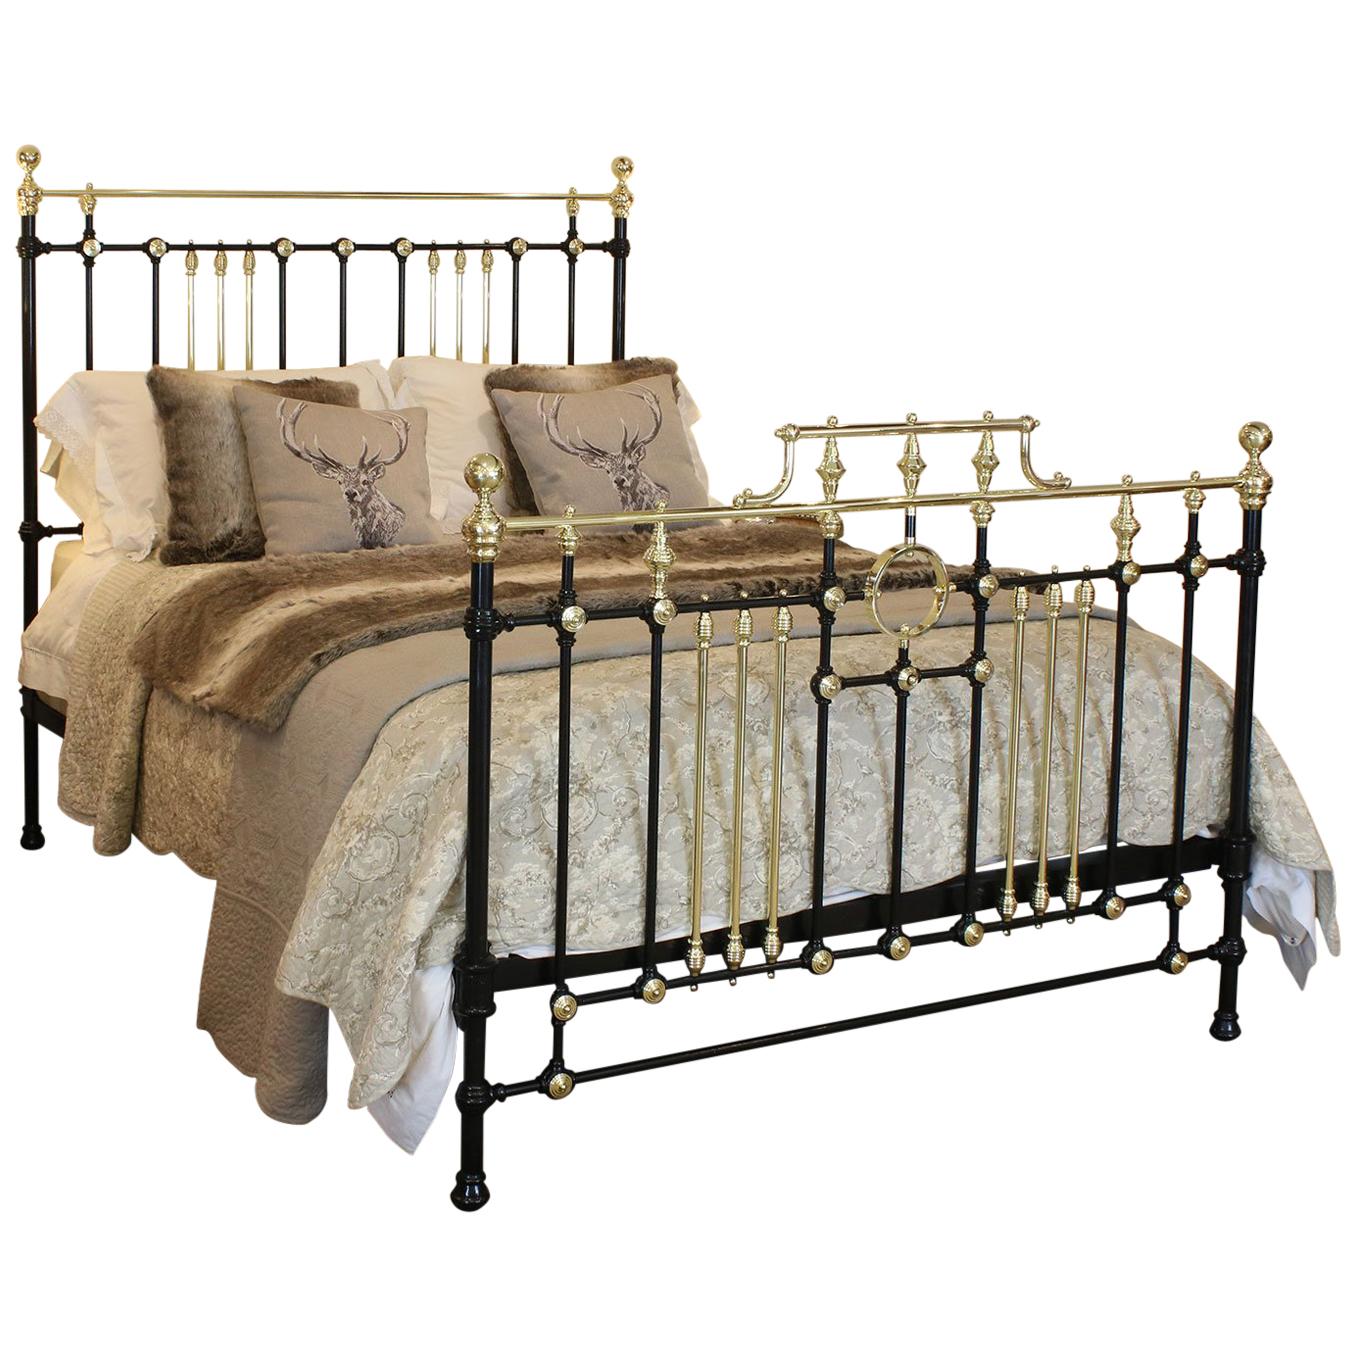 Decorative Brass and Iron Bed MK151